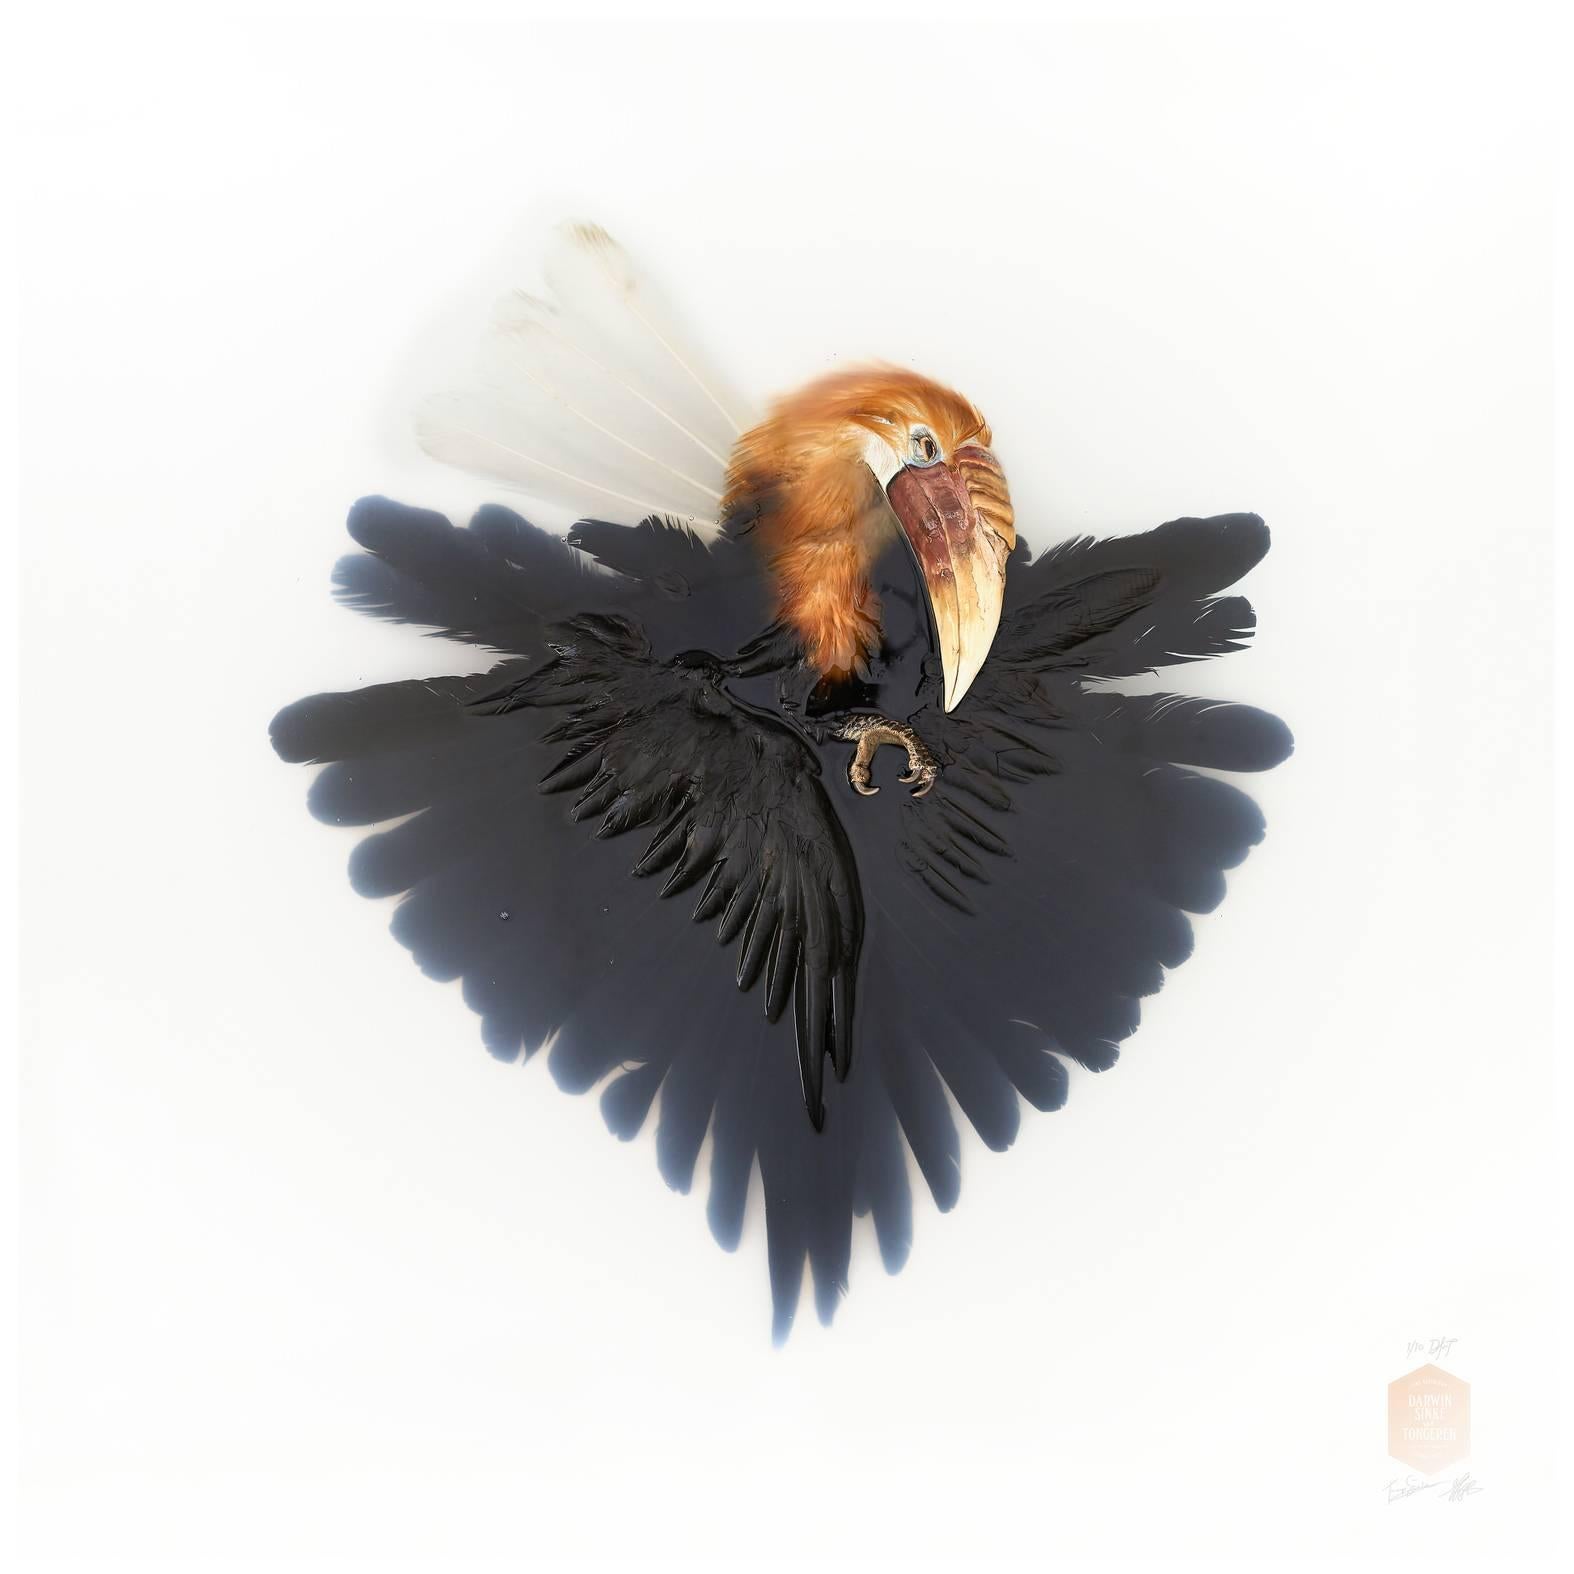 Art Print Titled 'Unknown Pose by Wreathed Hornbill' by Sinke & van Tongeren For Sale